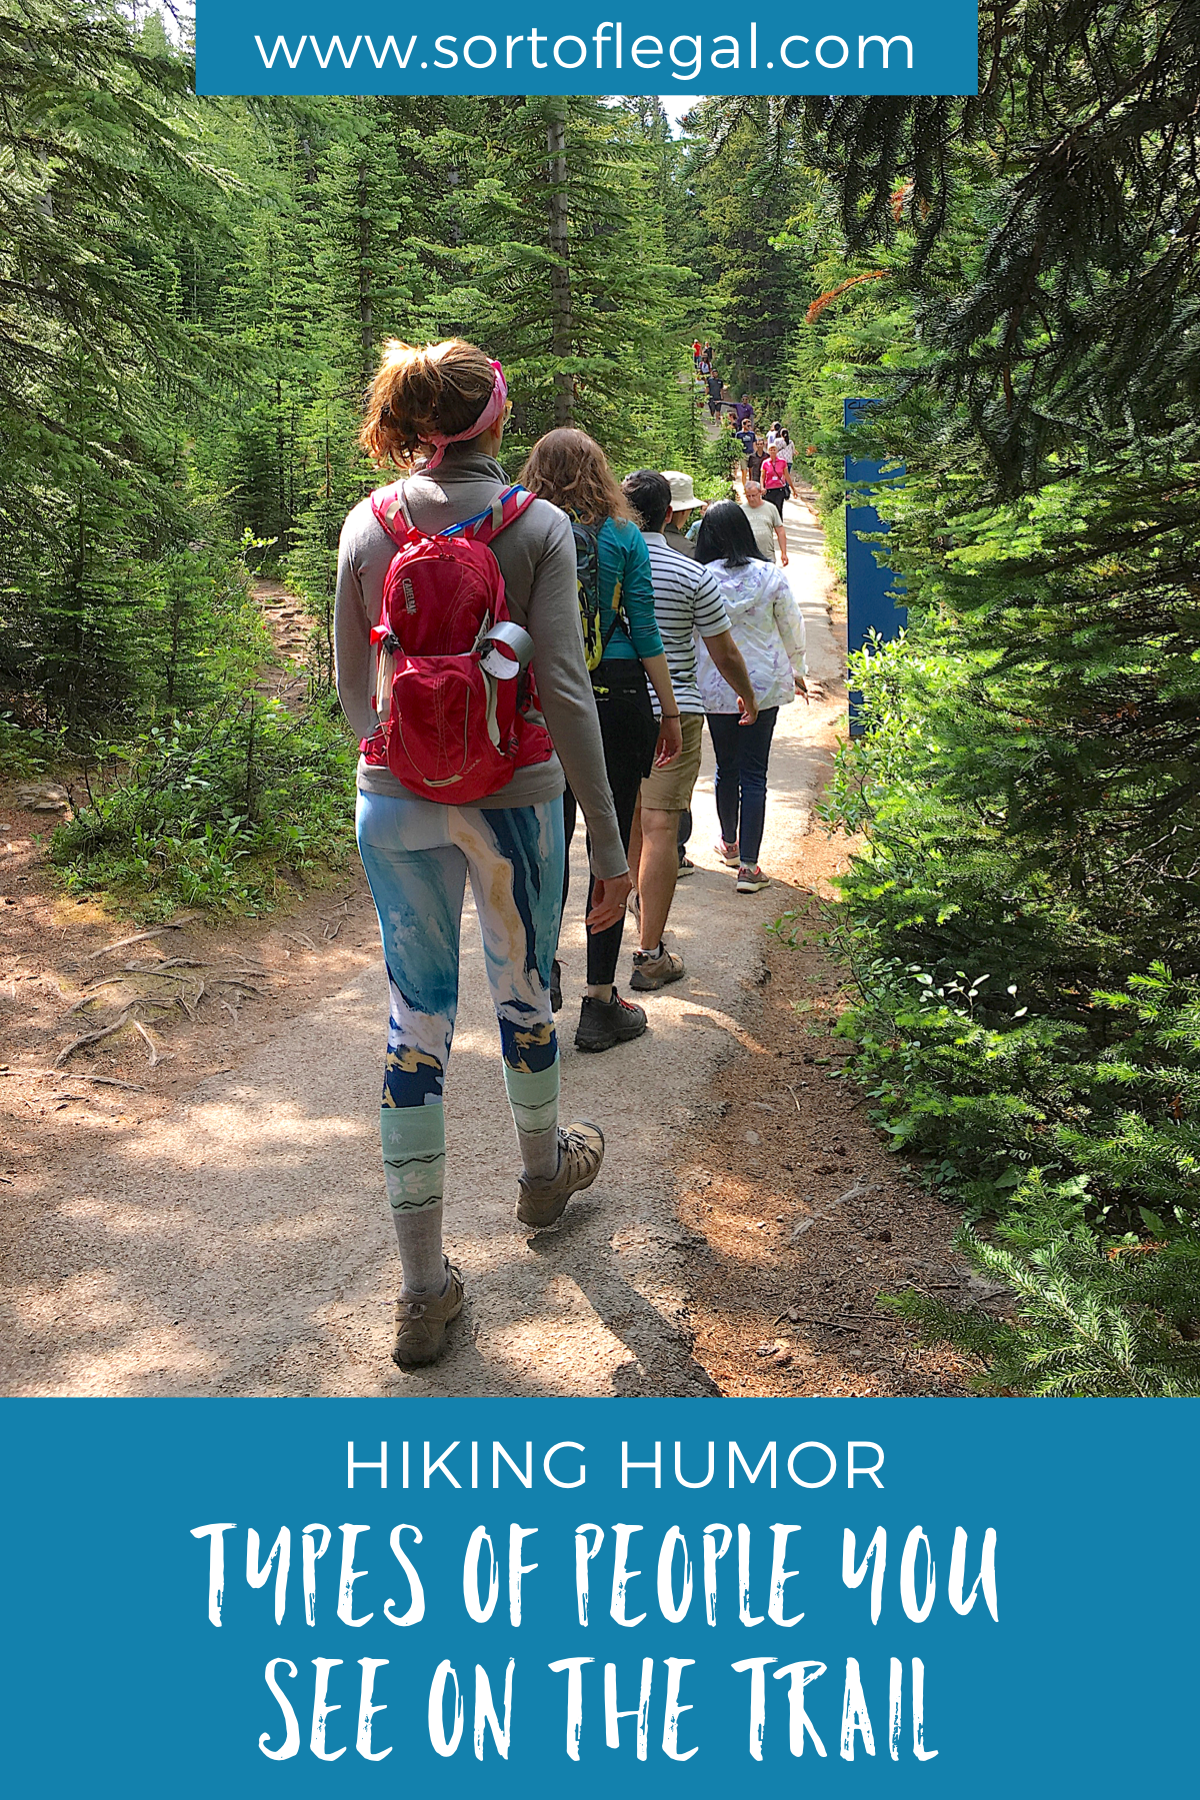 Hiking Humor: The People You See on the Trail